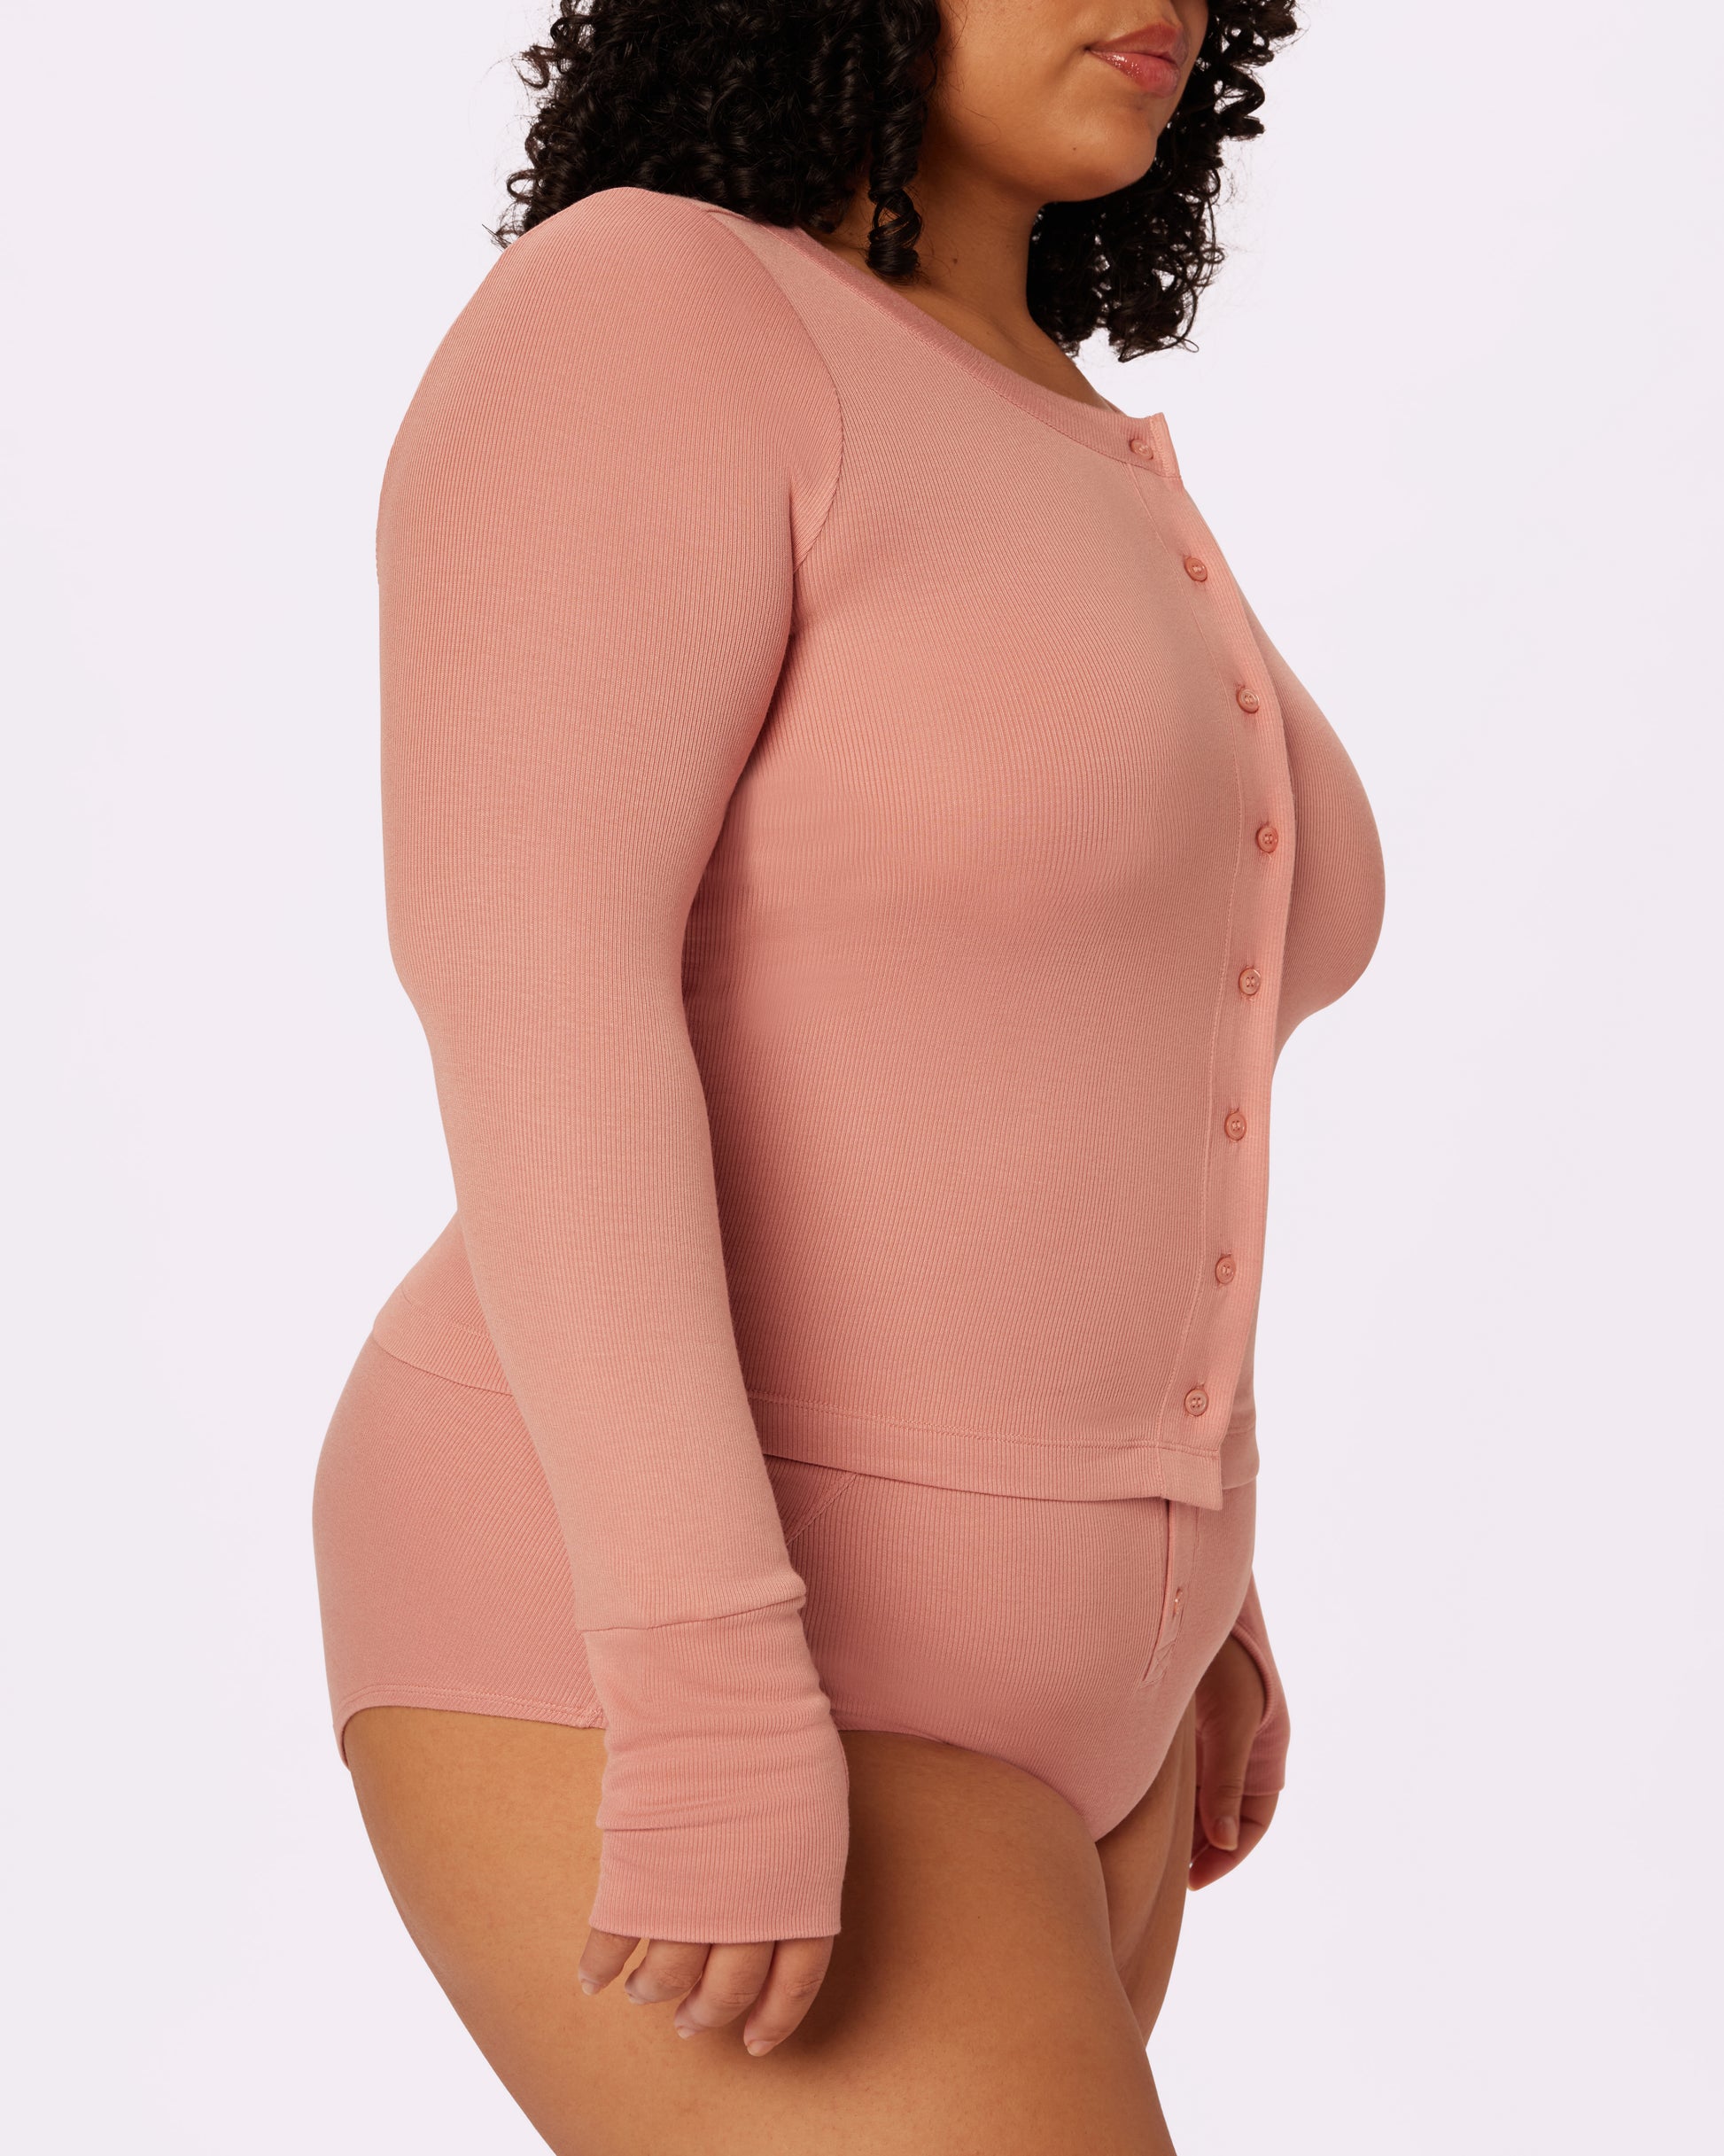 Love at First Layer 2-Piece Set